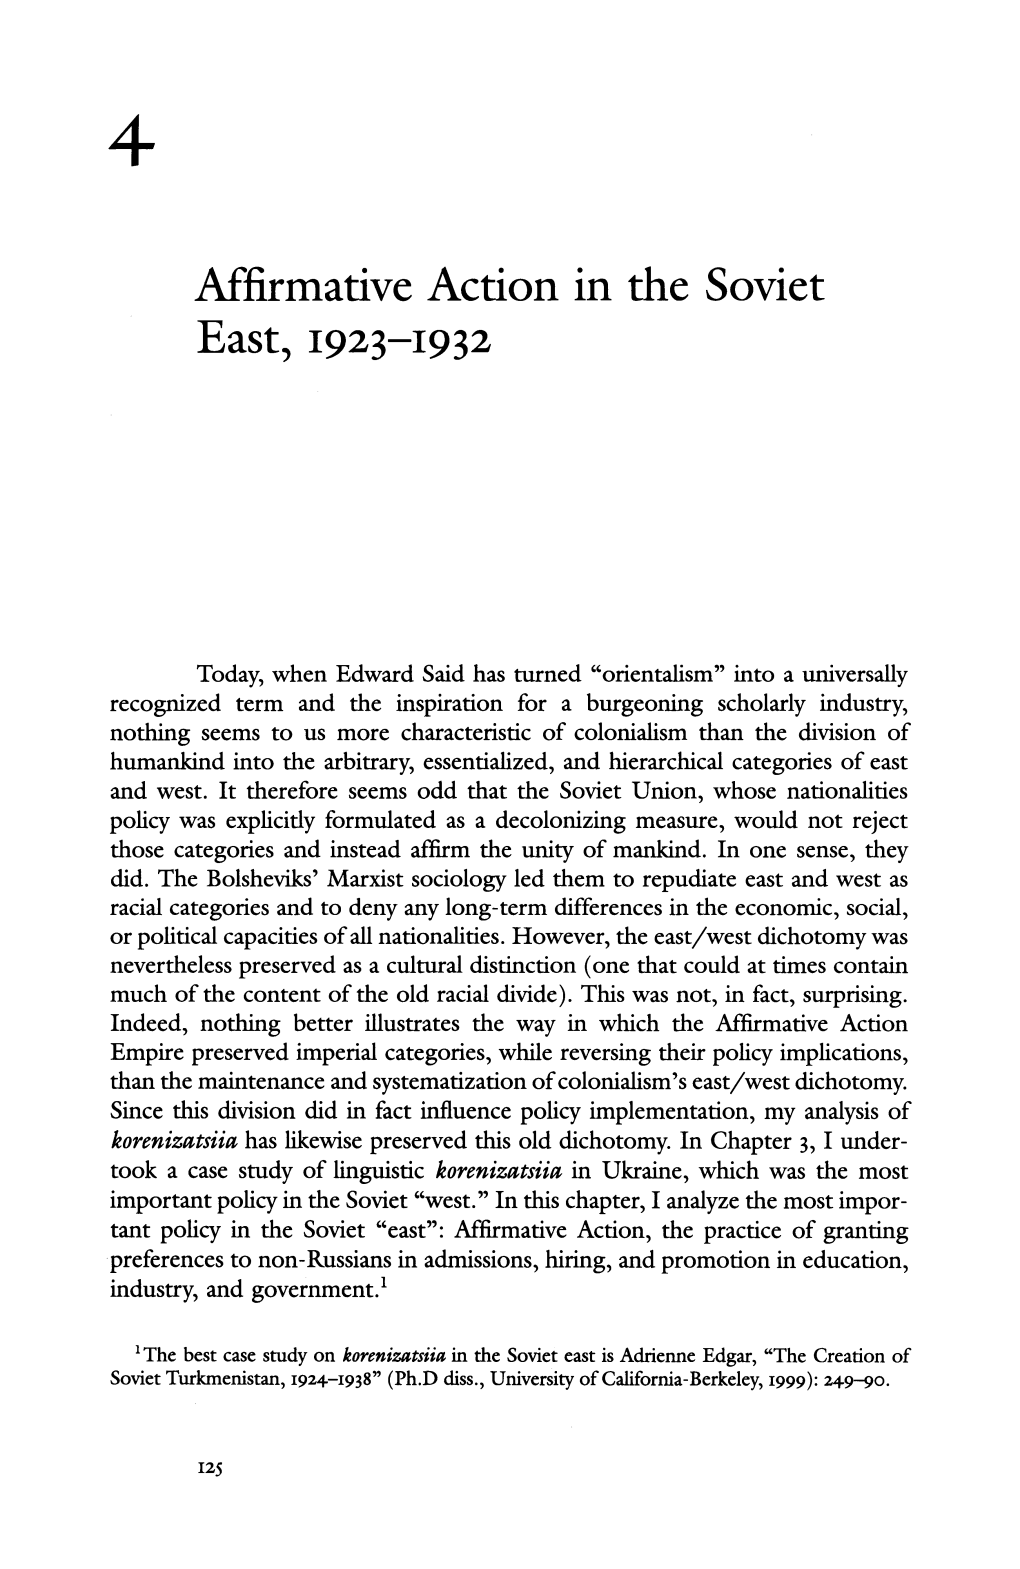 Mfirmative Action in the Soviet East, 1923-1932